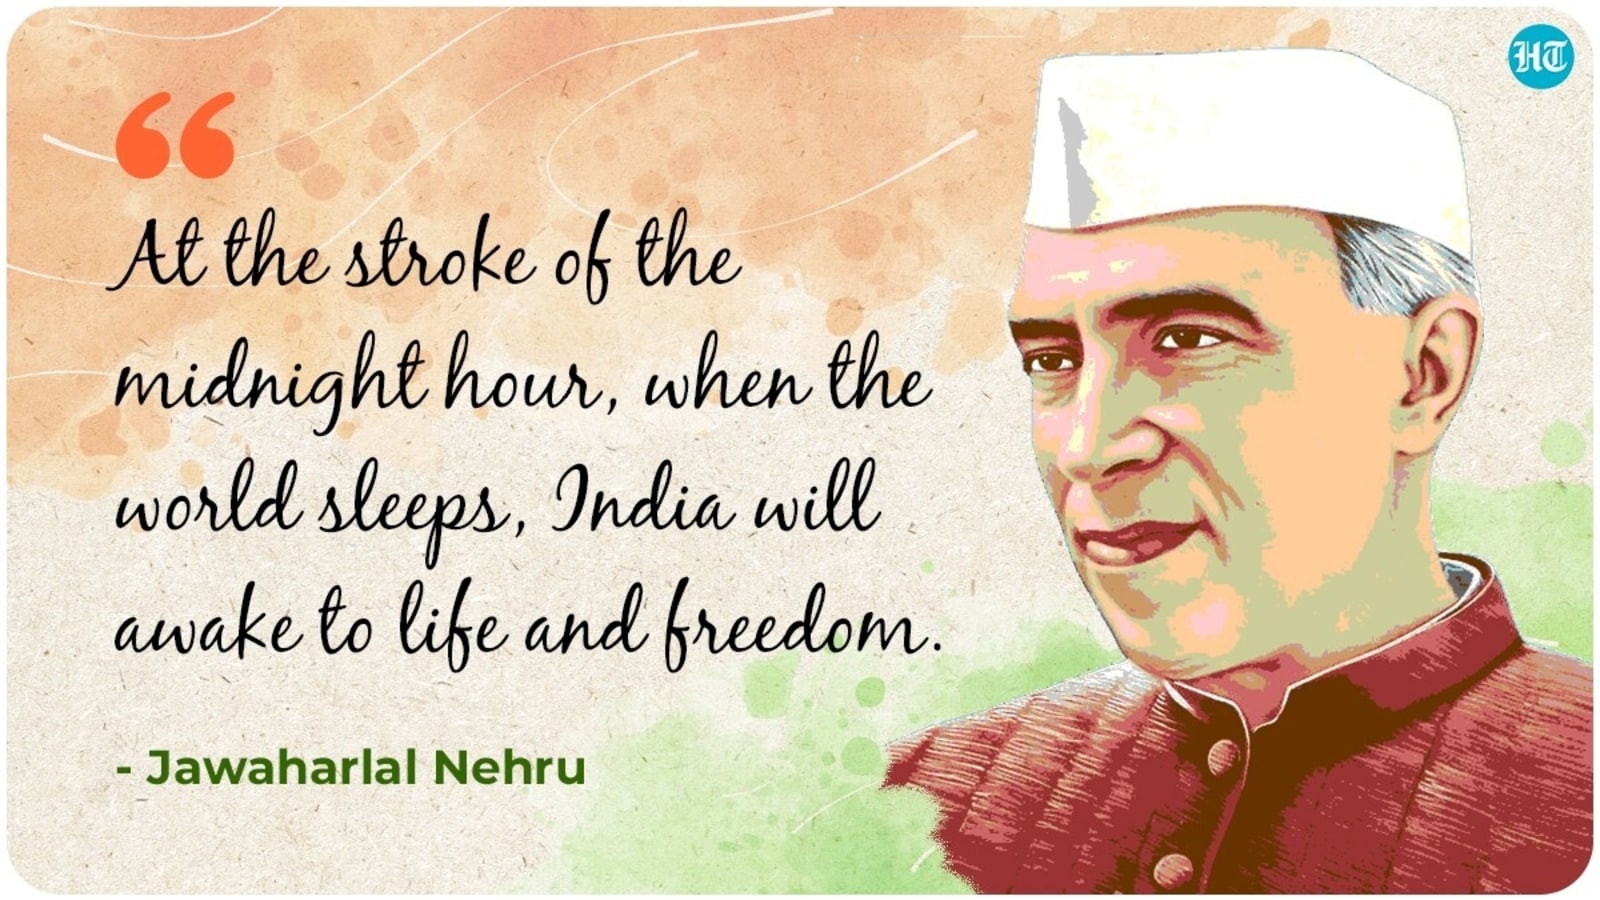 75th Independence Day: Best quotes, image, wishes, messages to share on Independence Day